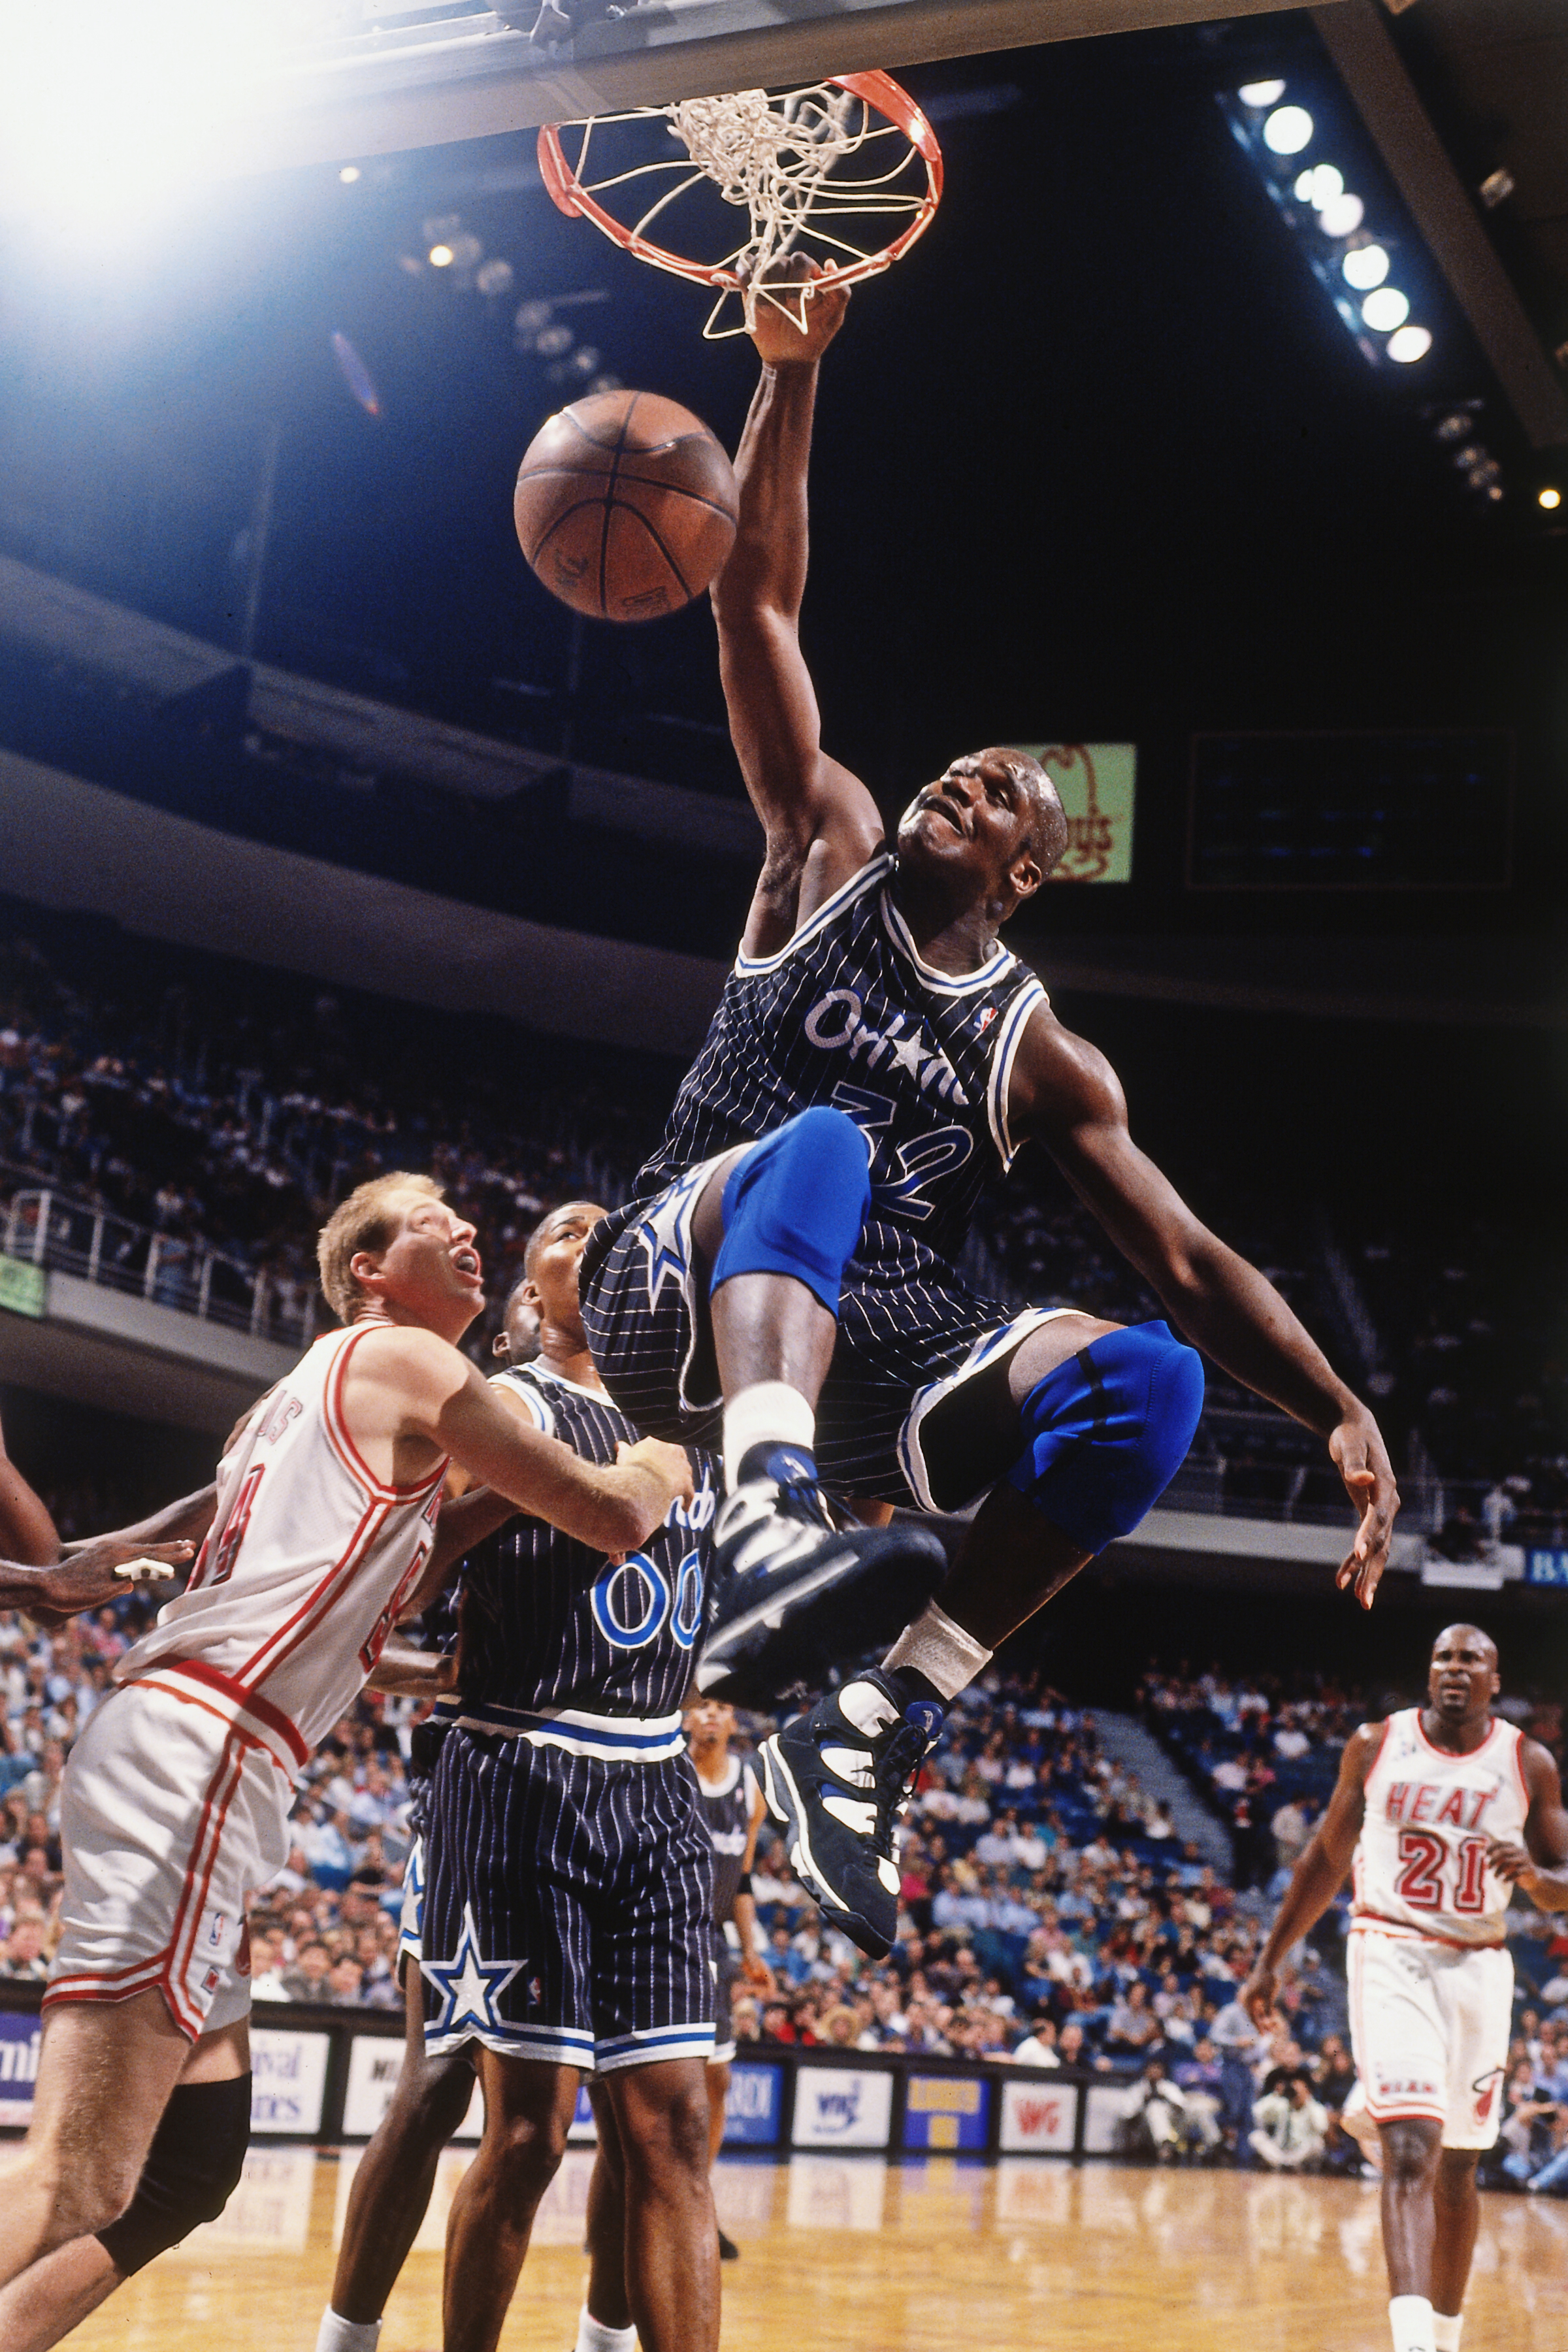 Orlando Magic player in mid dunk over a Chicago Bulls defender during a basketball game